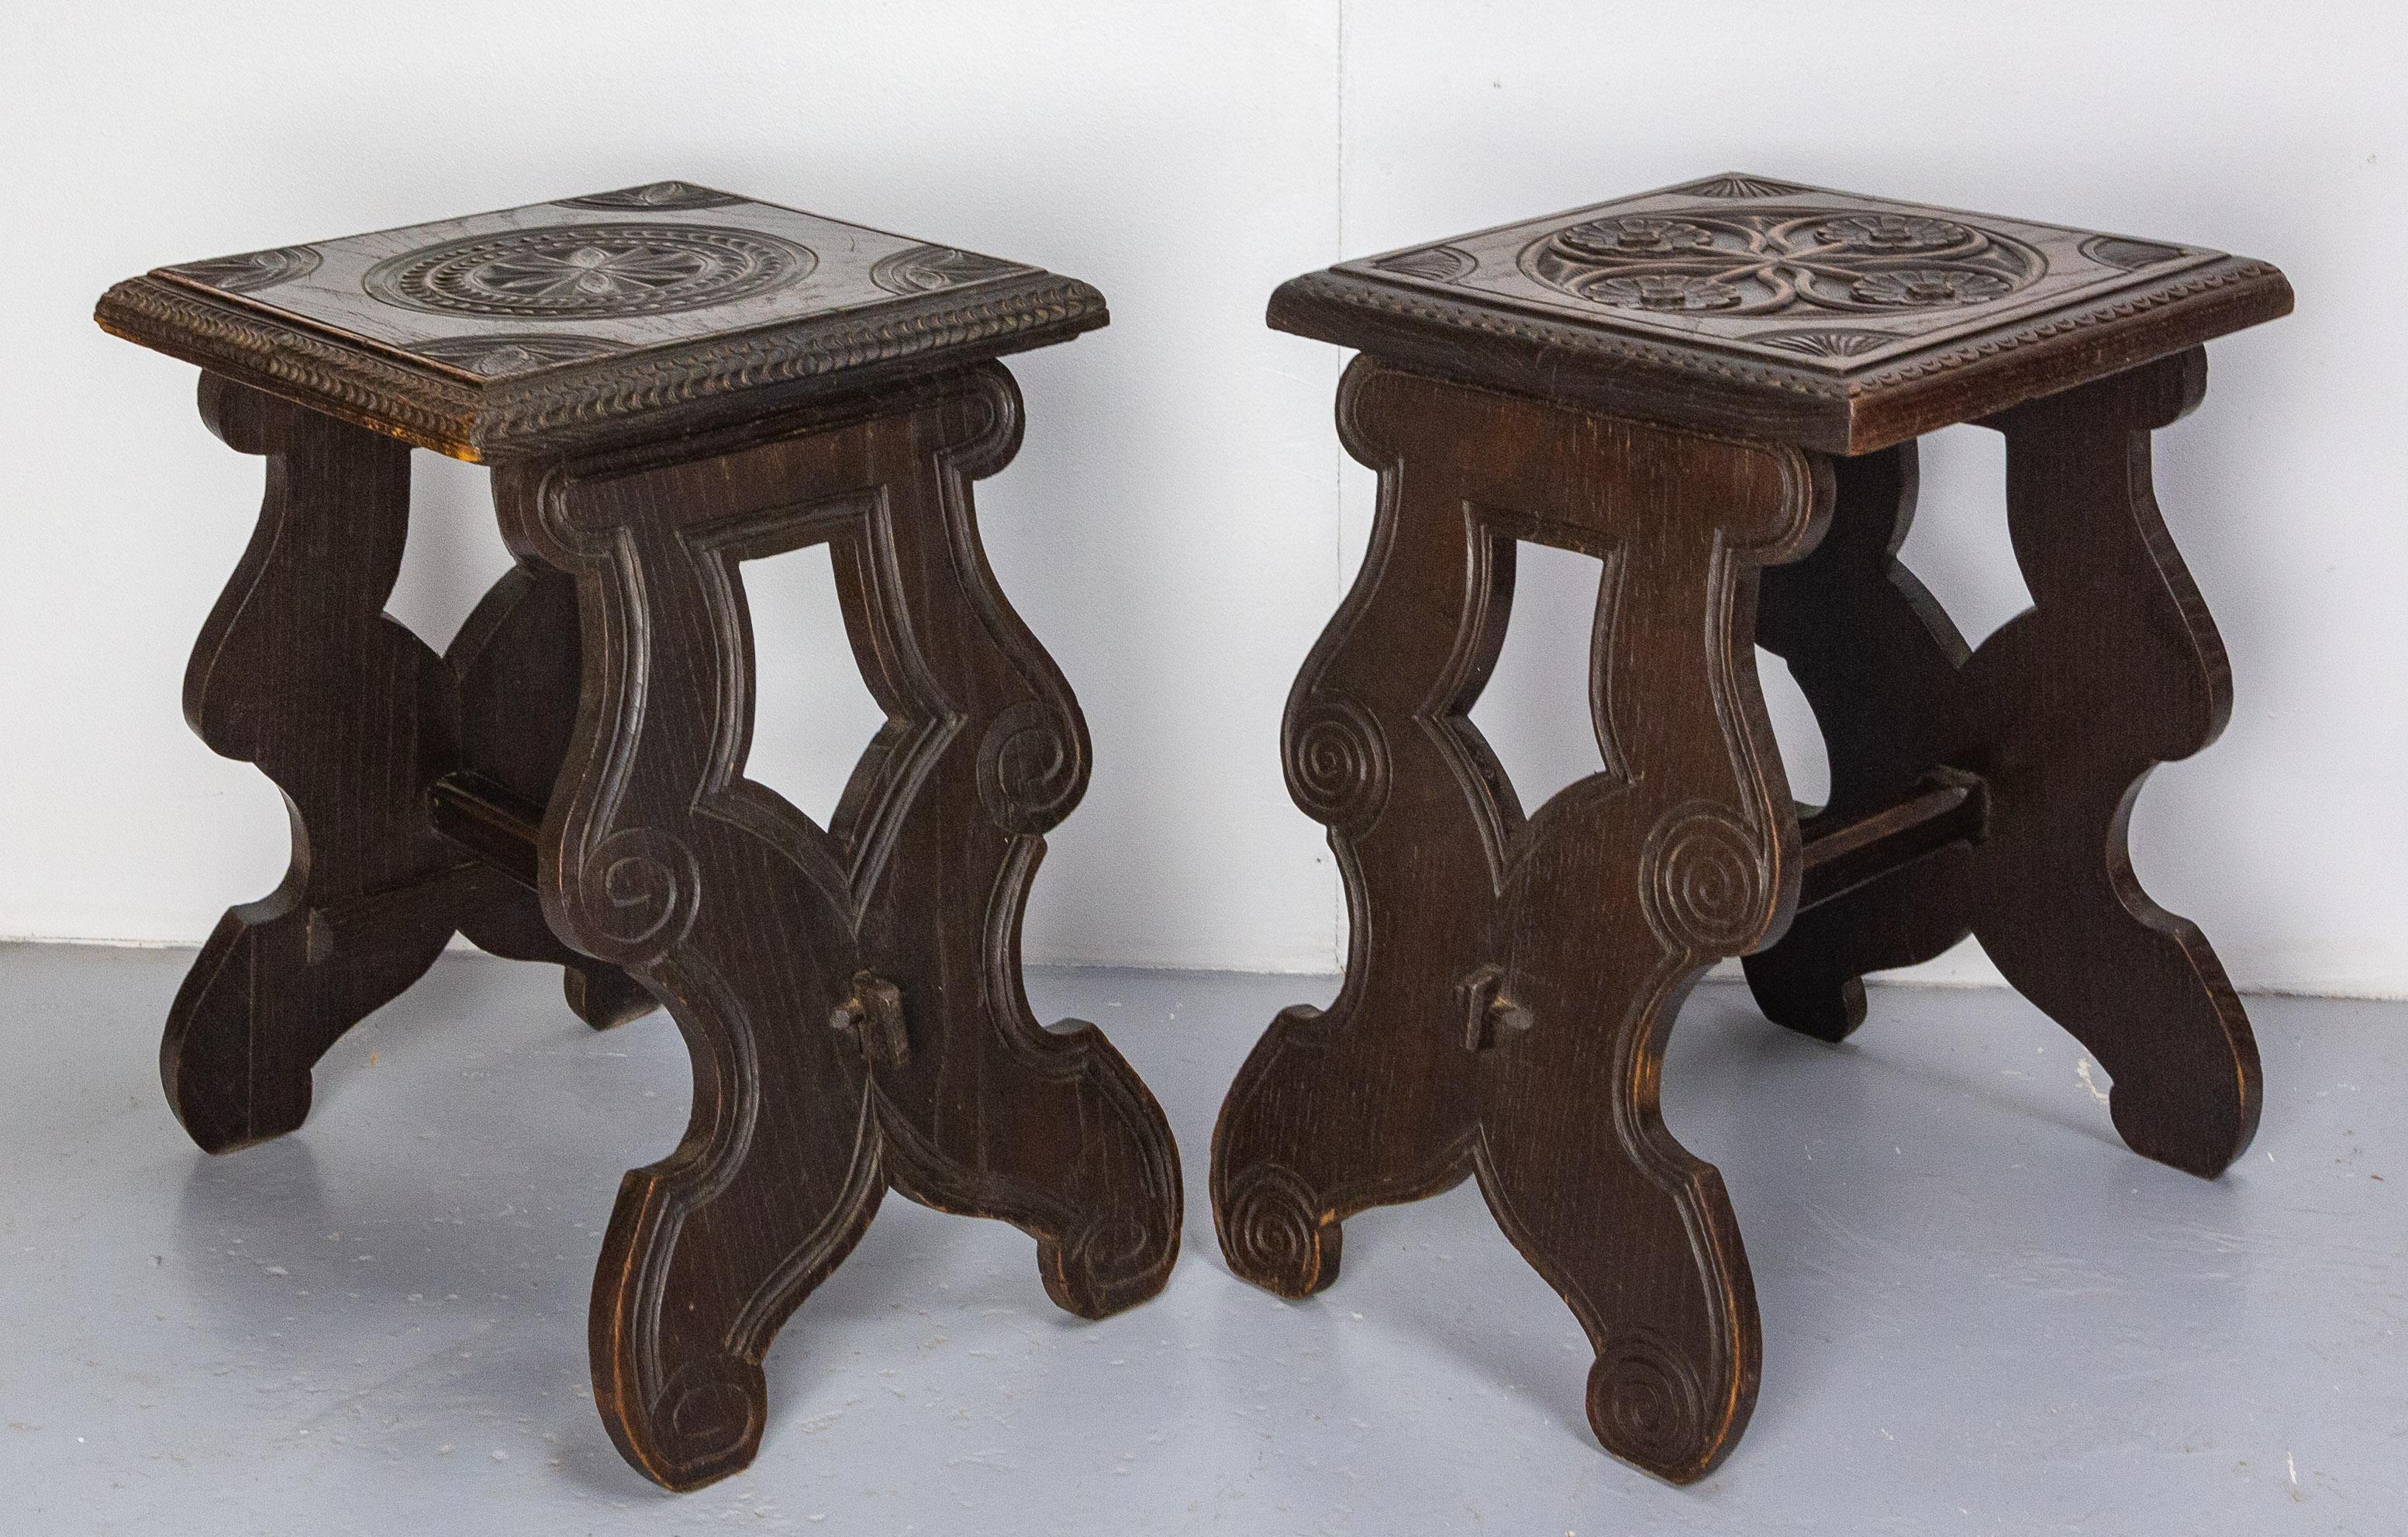 French Provincial French Massive Chestnut Pair of Stools from Britanny, Late 19th Century For Sale